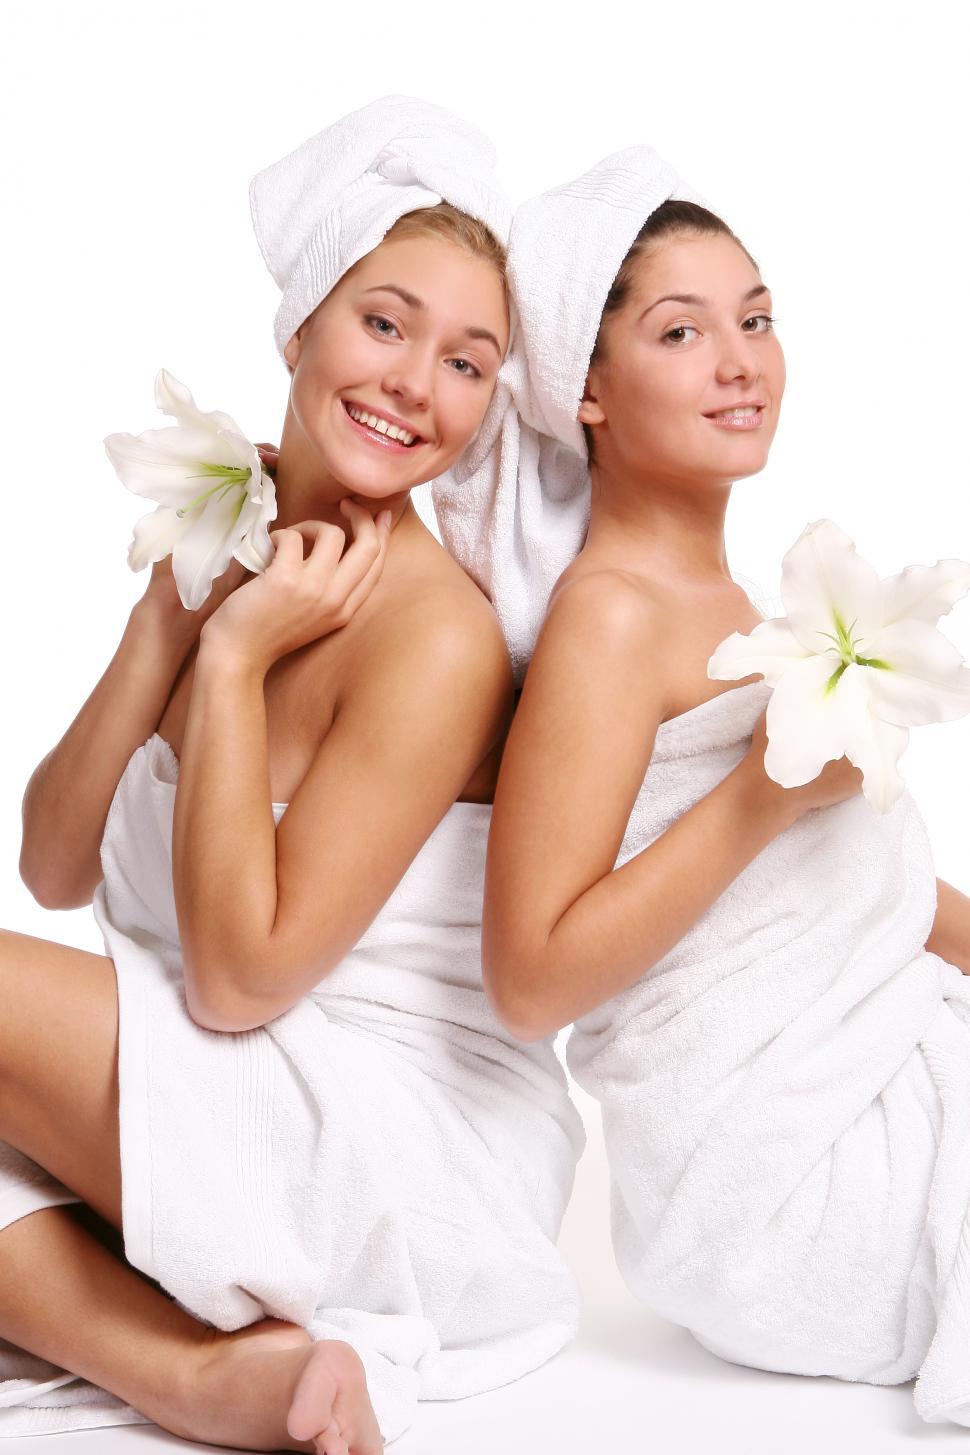 Two women in towels during spa day